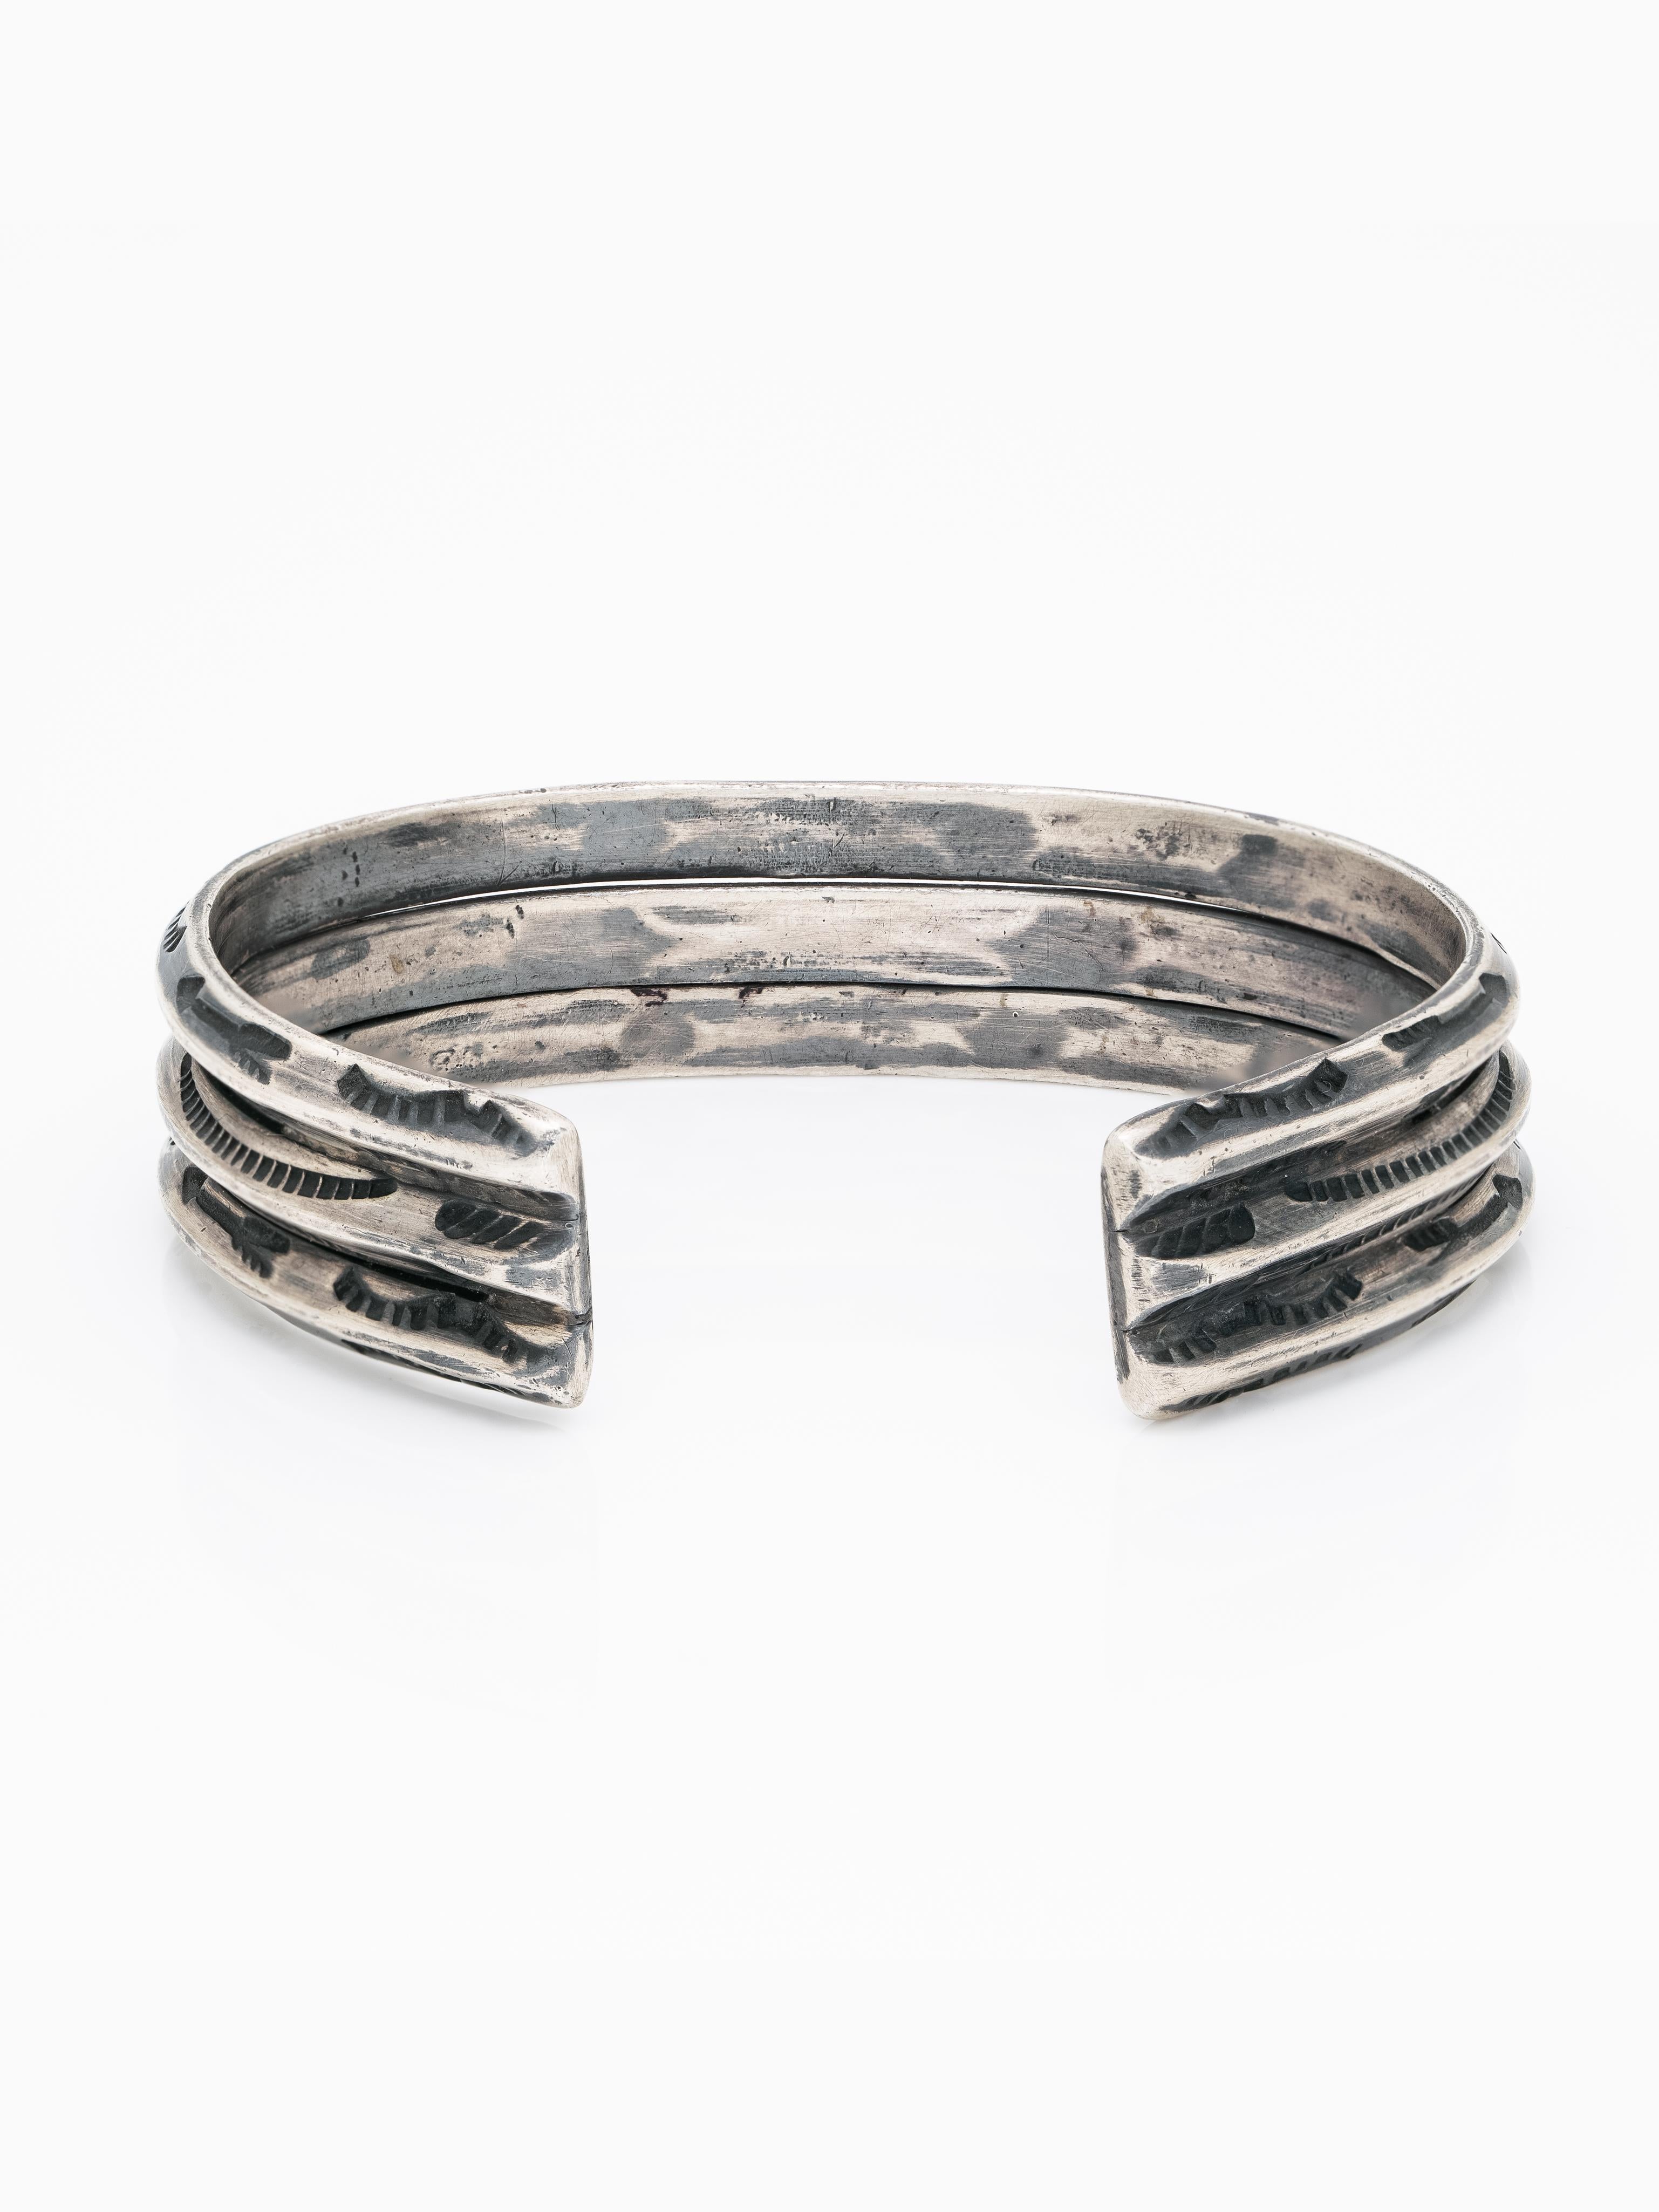 Vintage Native American Navajo Sterling Hand Engraved Arrows Bracelet Cuff In Good Condition For Sale In New York, NY